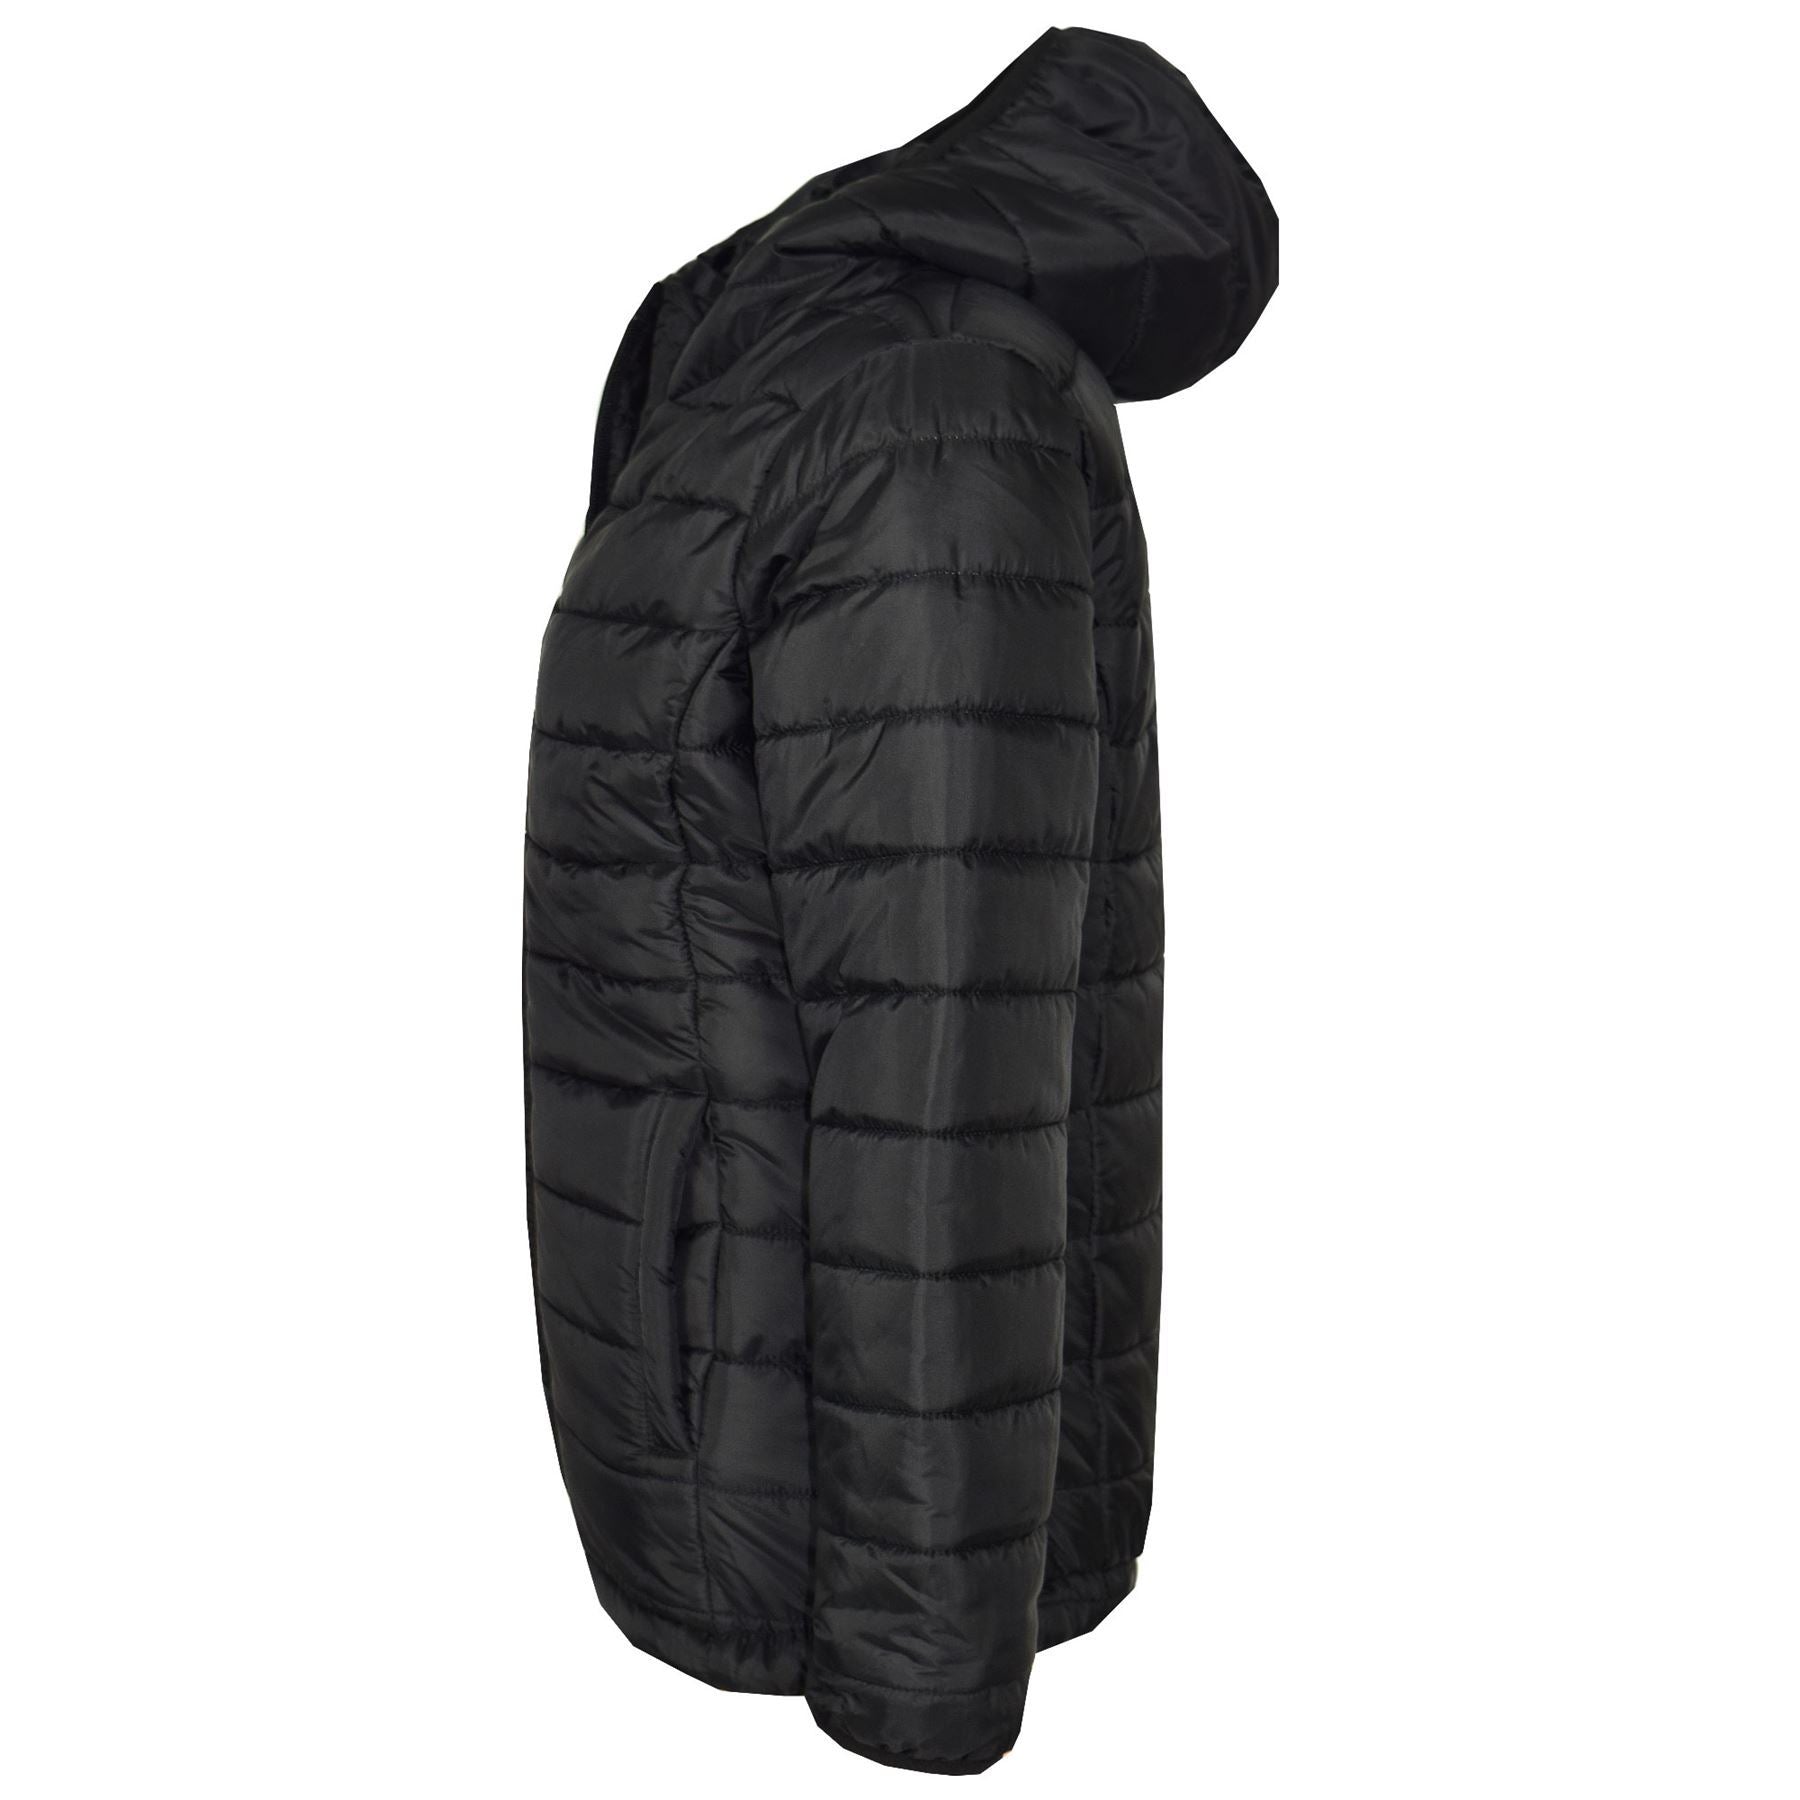 Kids Jackets Thick Black Boys Hooded Padded Puffer